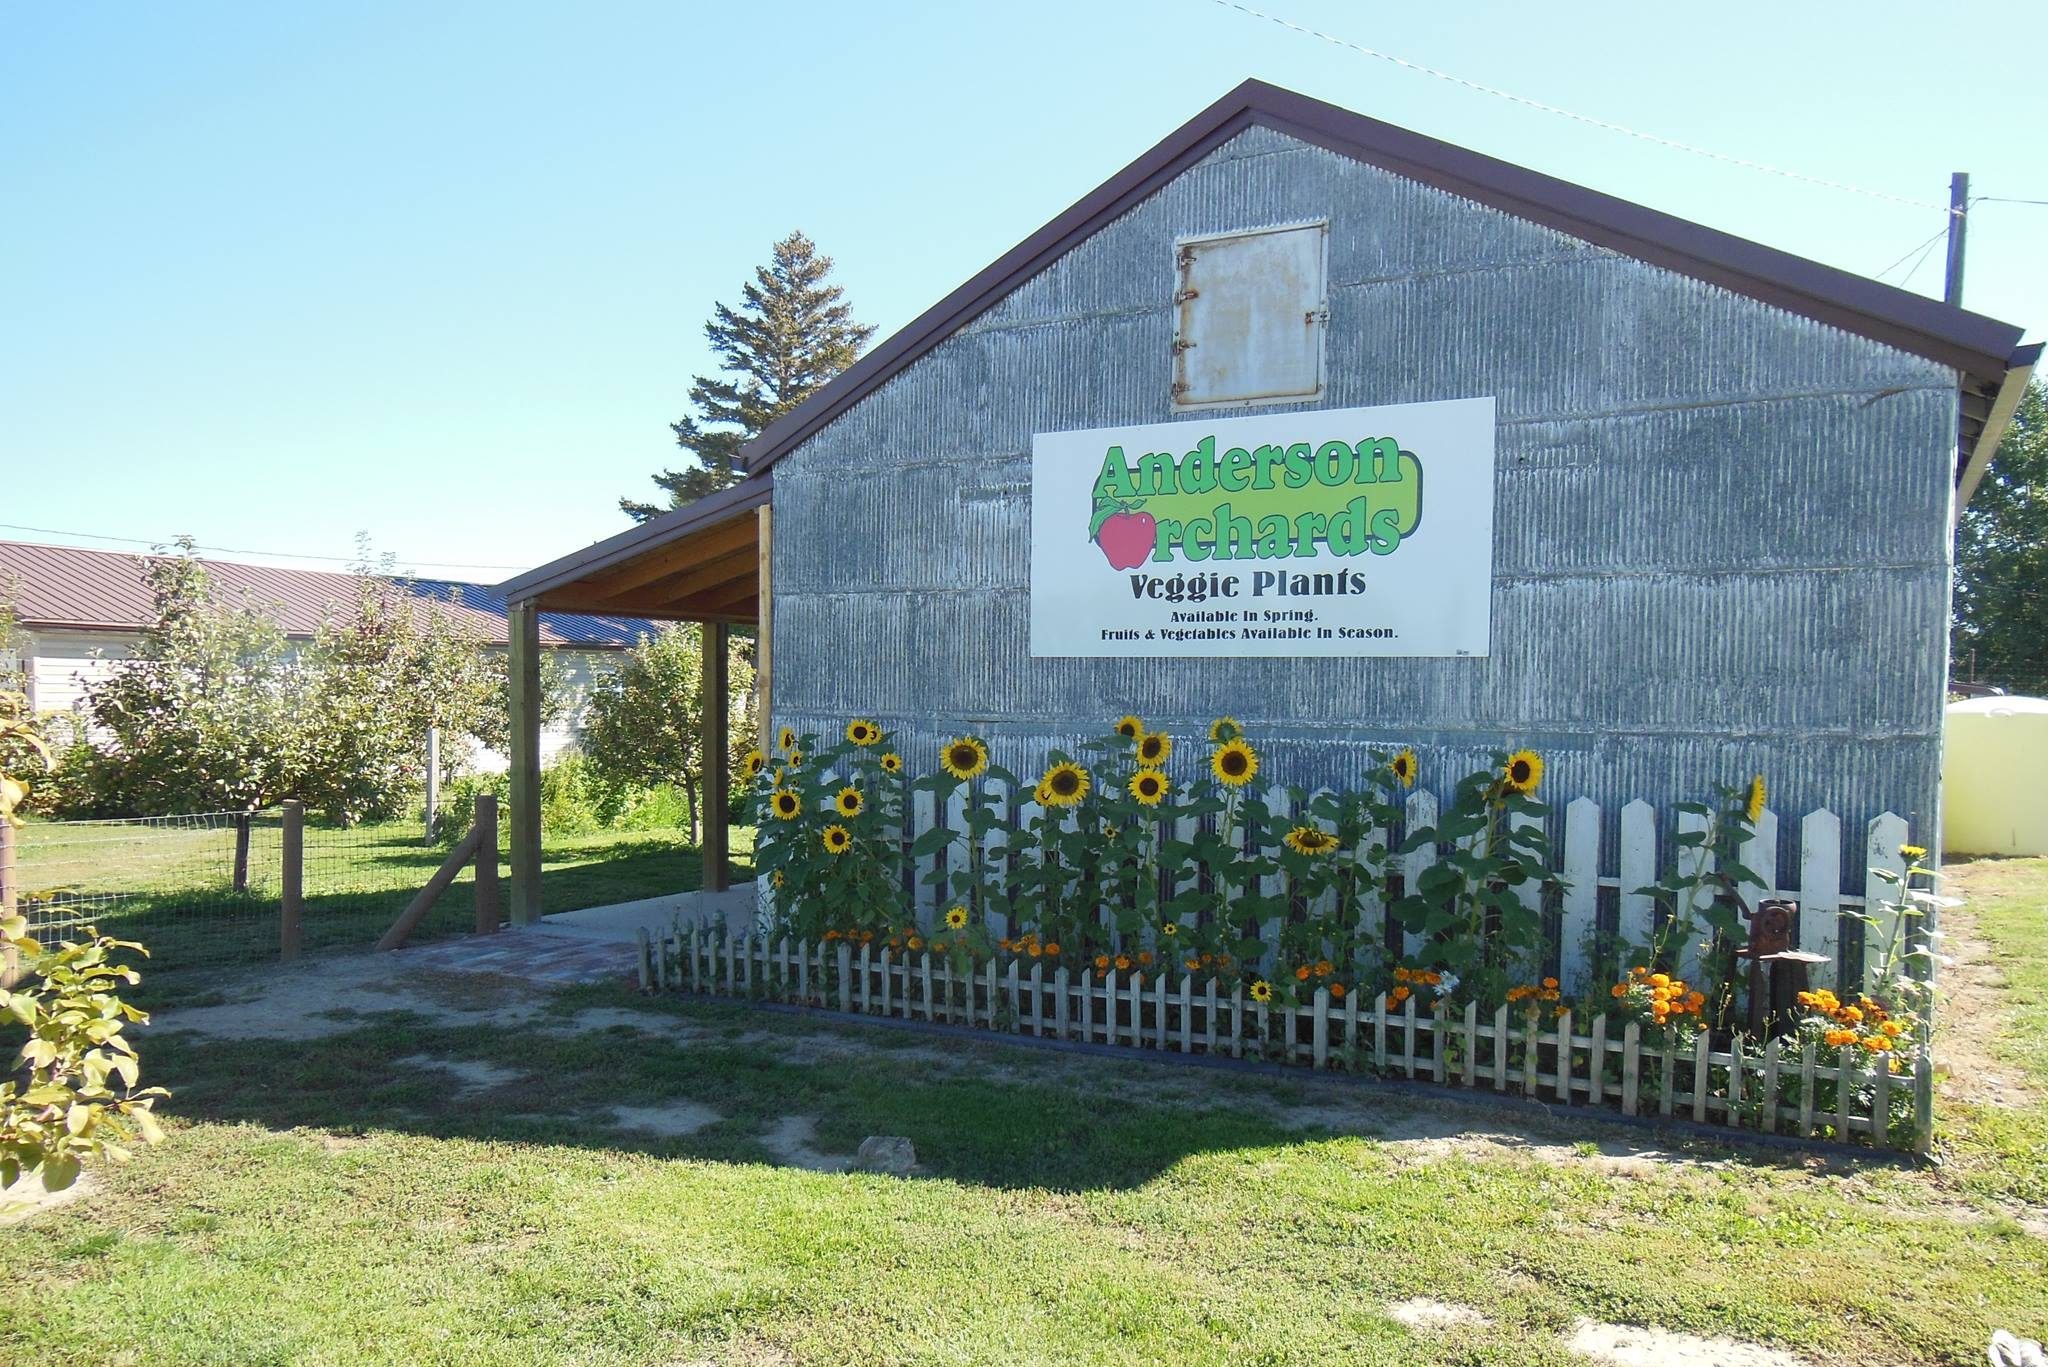 Anderson Orchards